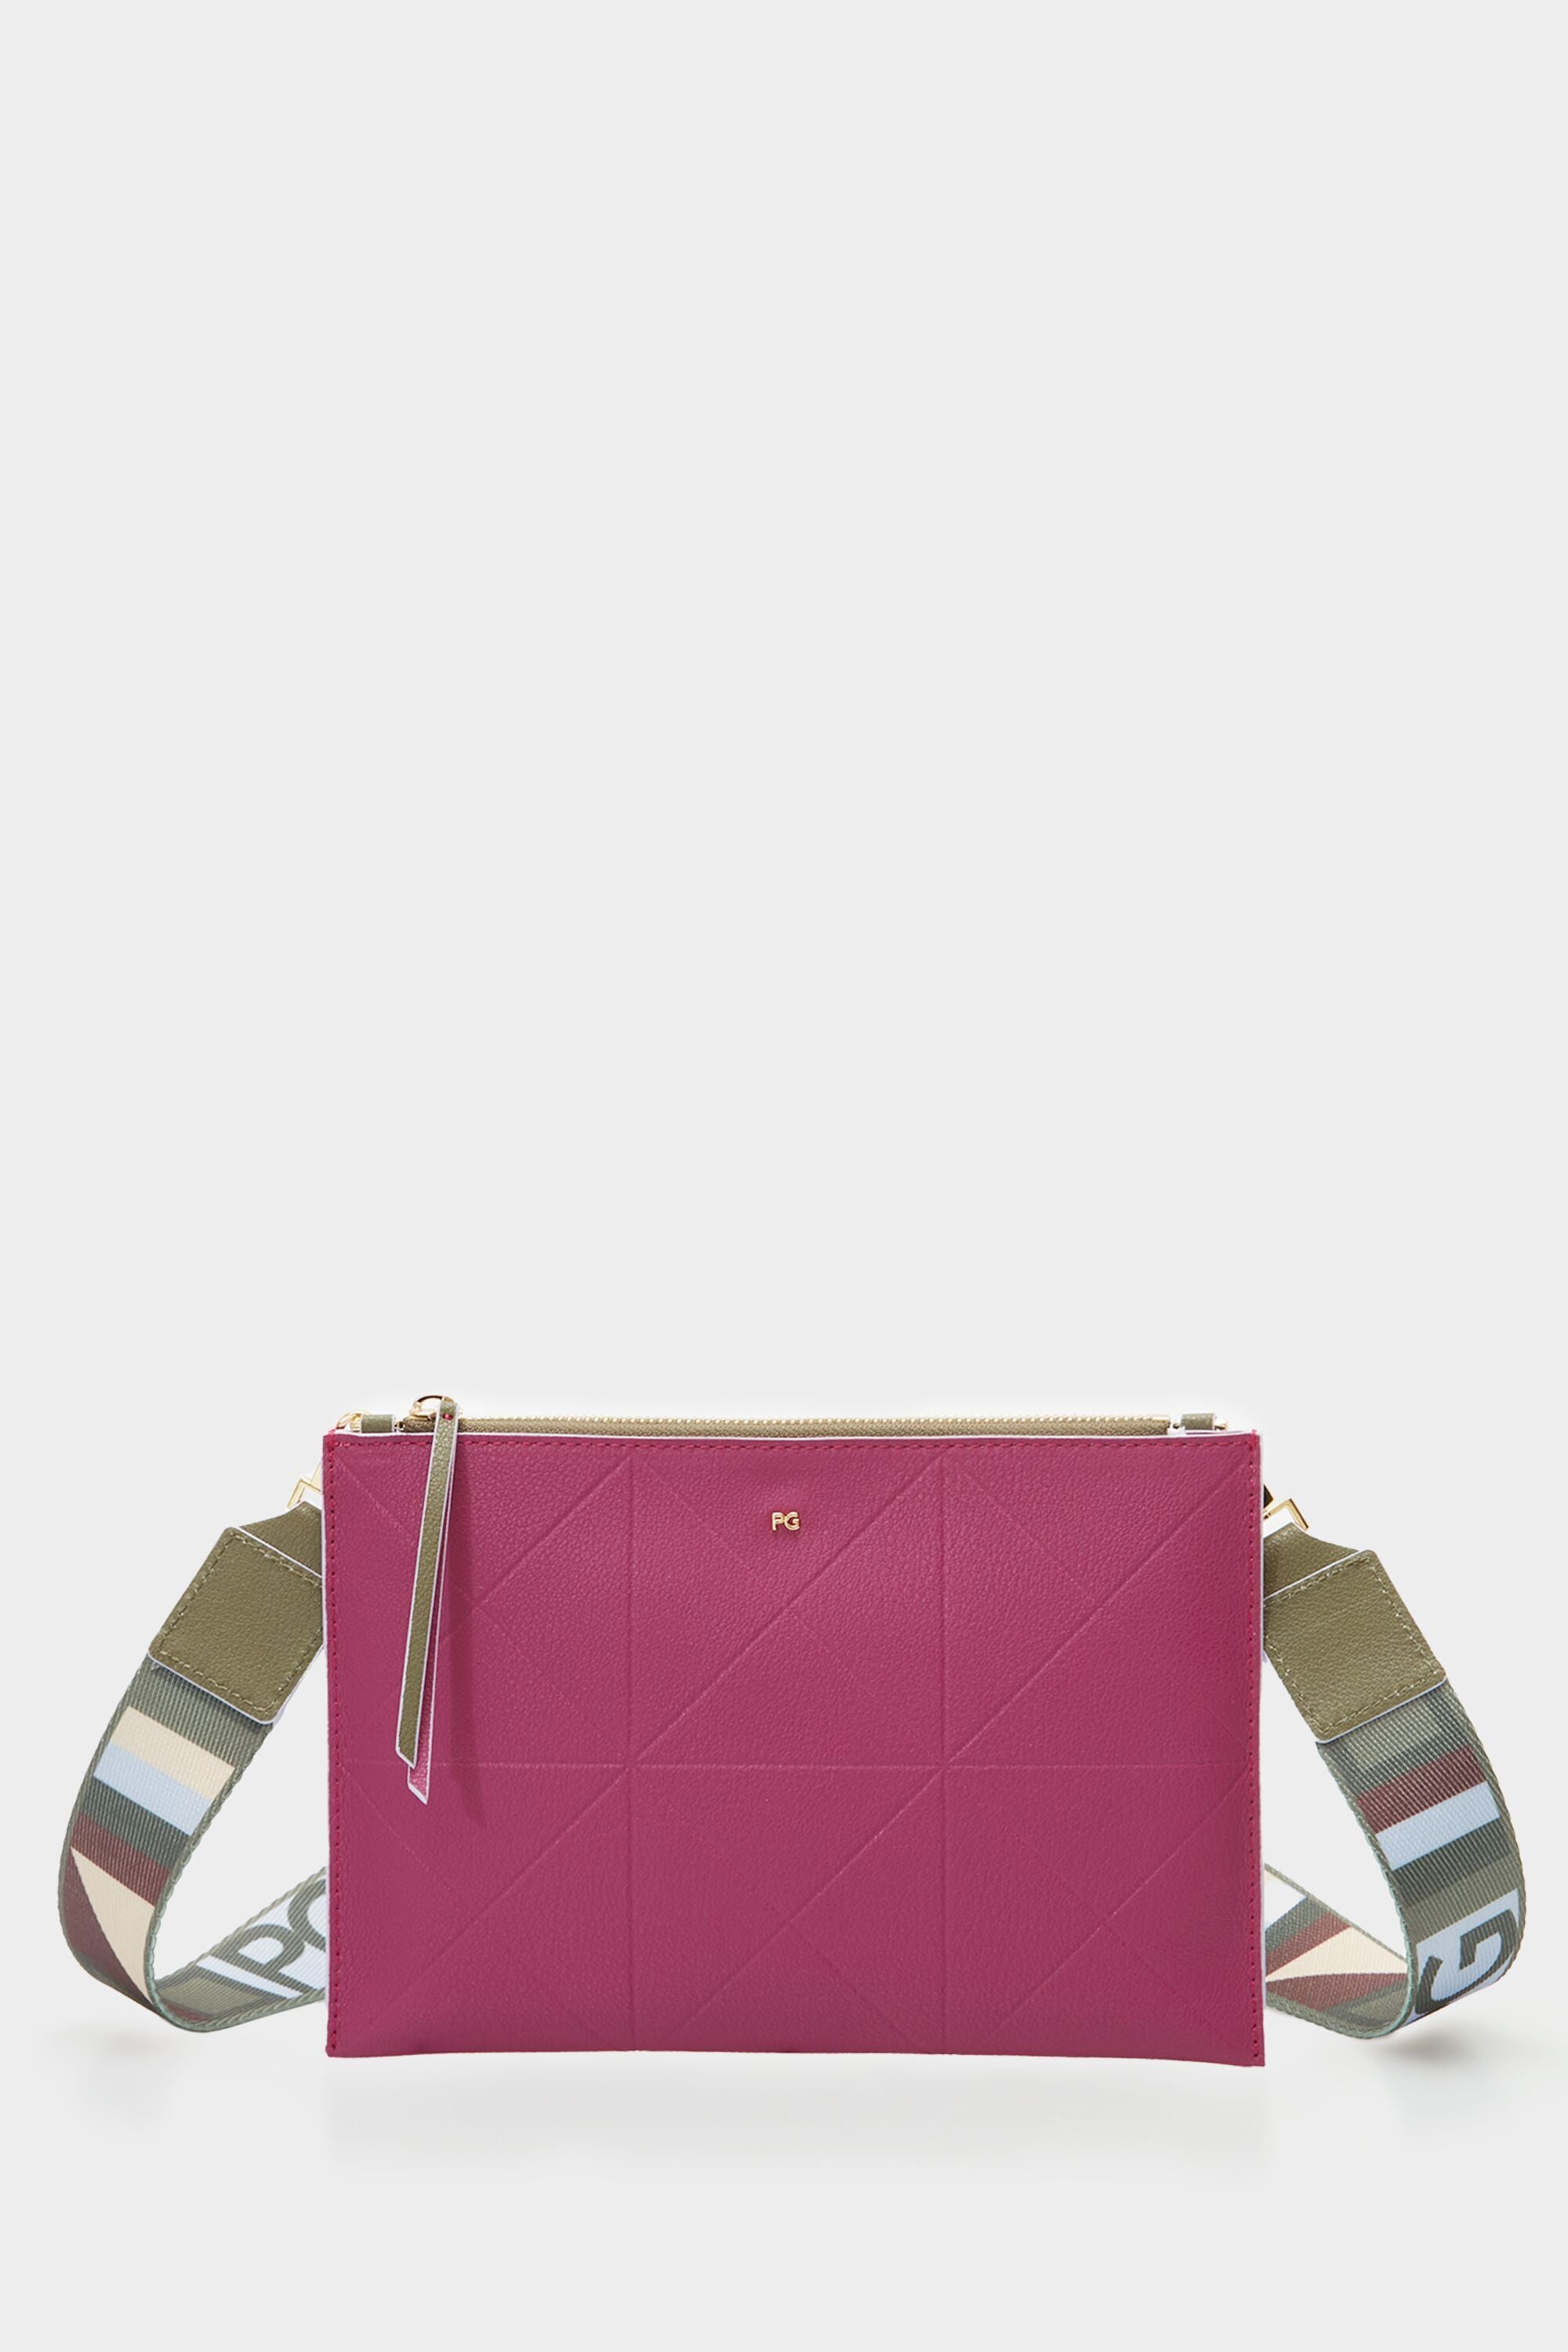 Leather Crossbody Bag PURIFICACION GARCIA Pink In Leather, 44% OFF